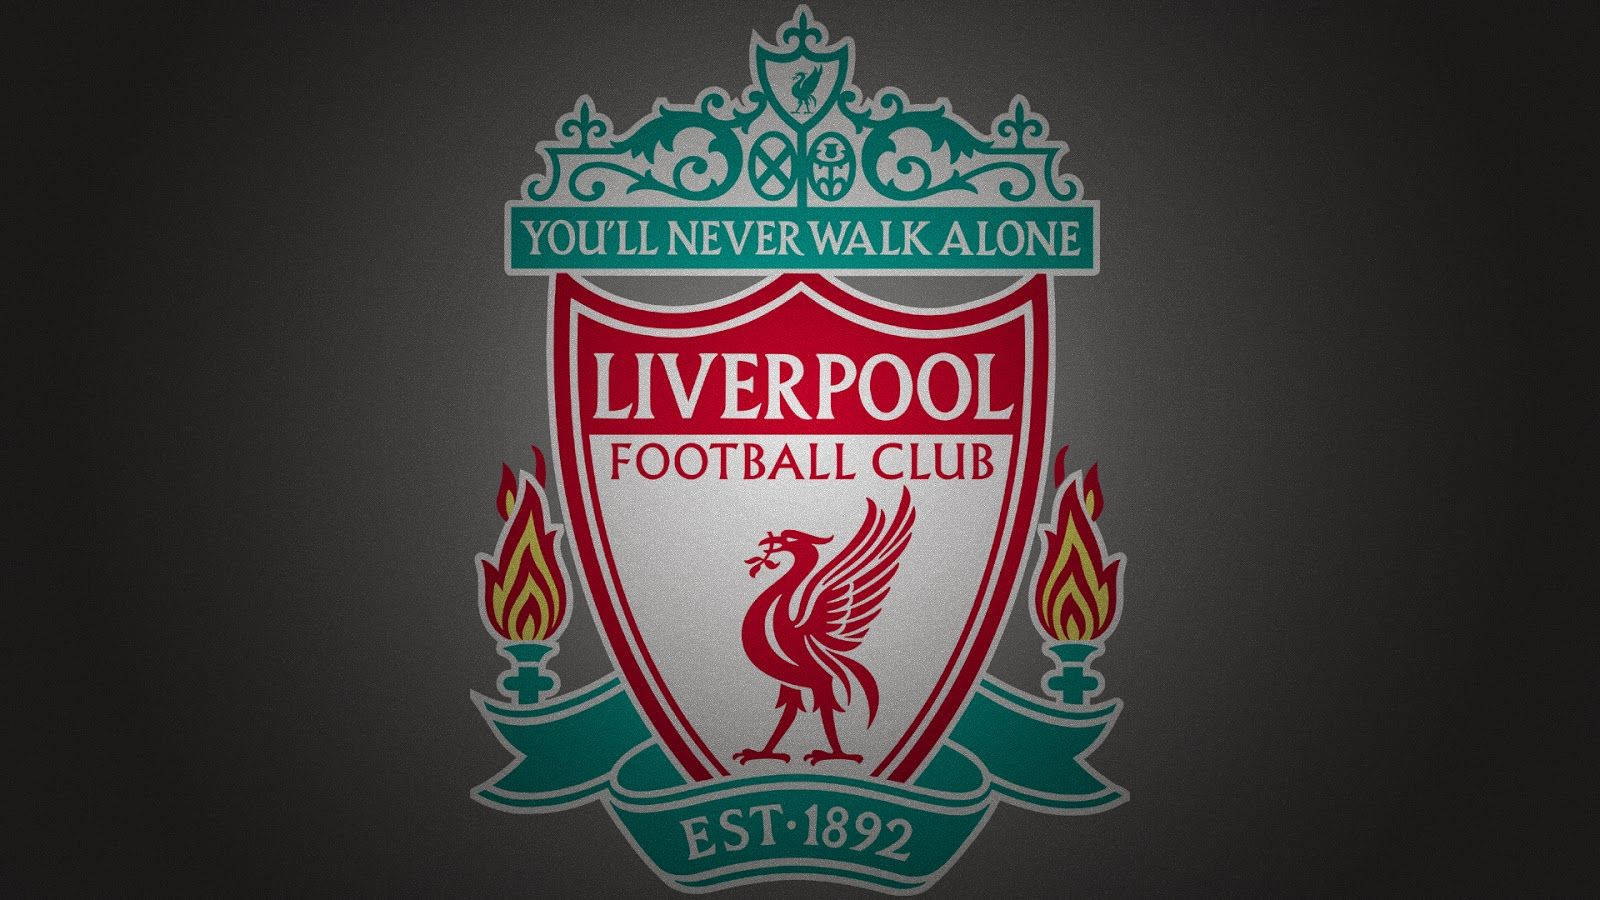 Show Your Pride For Liverpool Football Club! Background